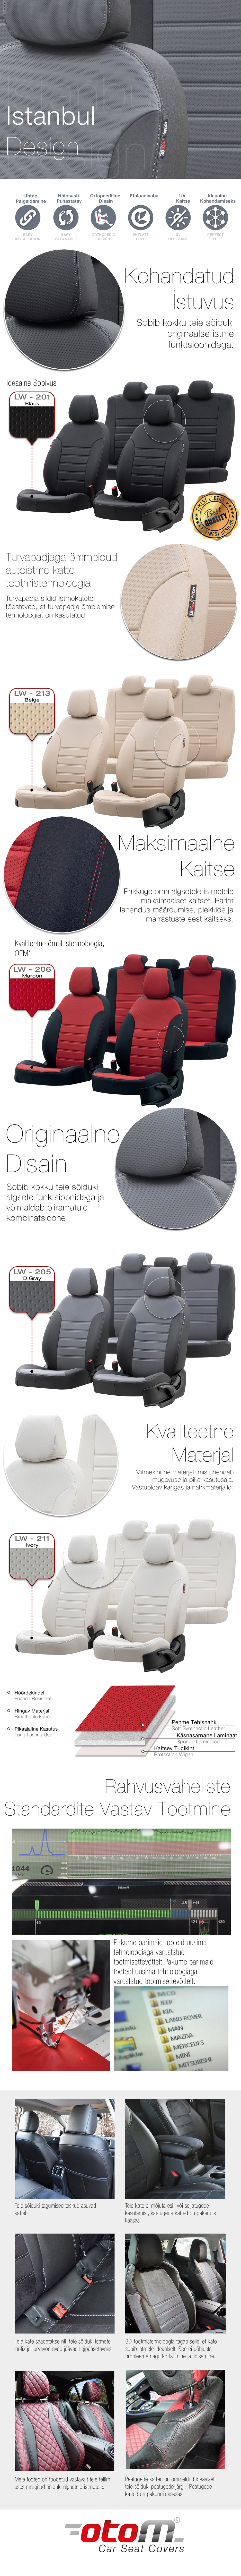 Istanbul design seat covers